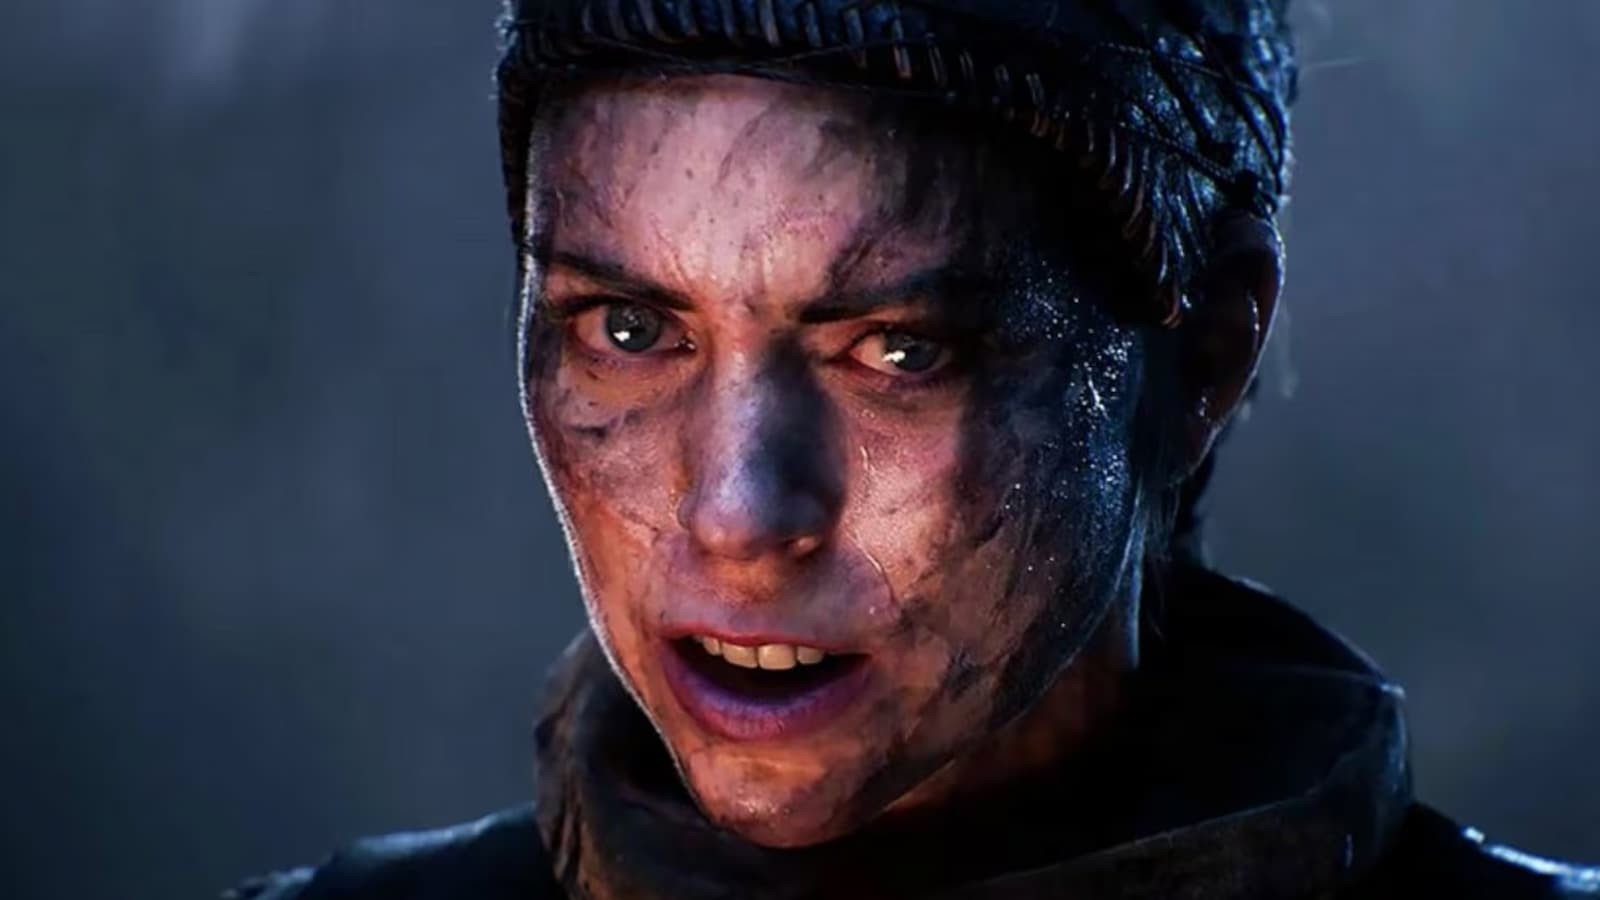 Ninja Theory wants to provide the best look at Senua's struggles in Hellblade 2.